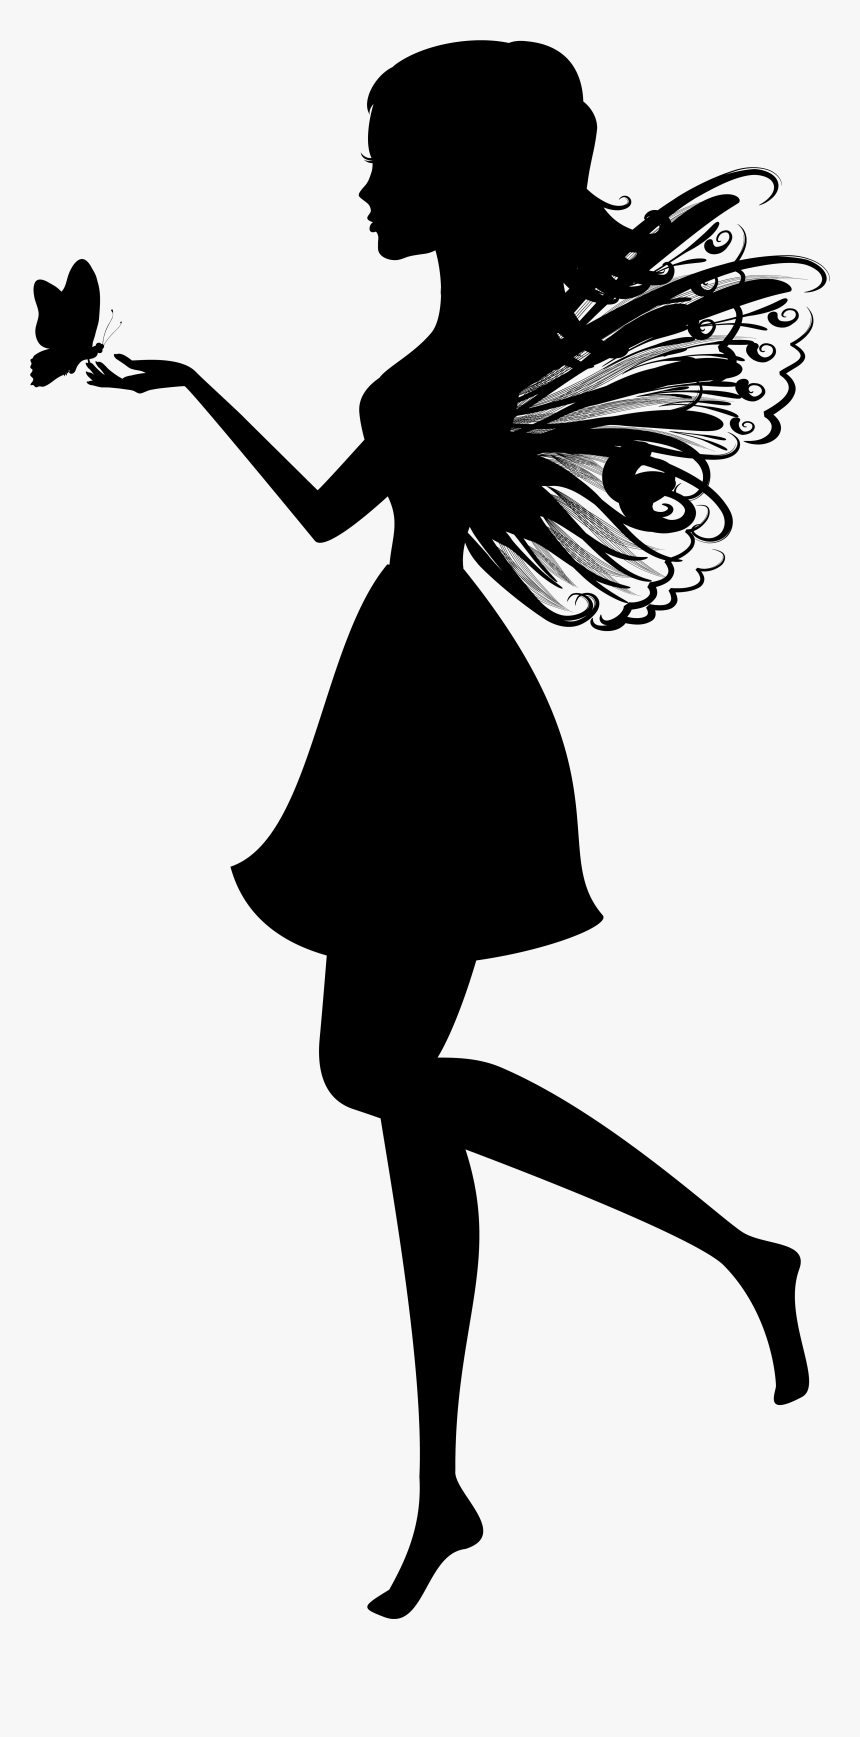 Image Result For Free Fairy Silhouette Png- - Free Fairy Silhouette Png, Transparent Png, Free Download